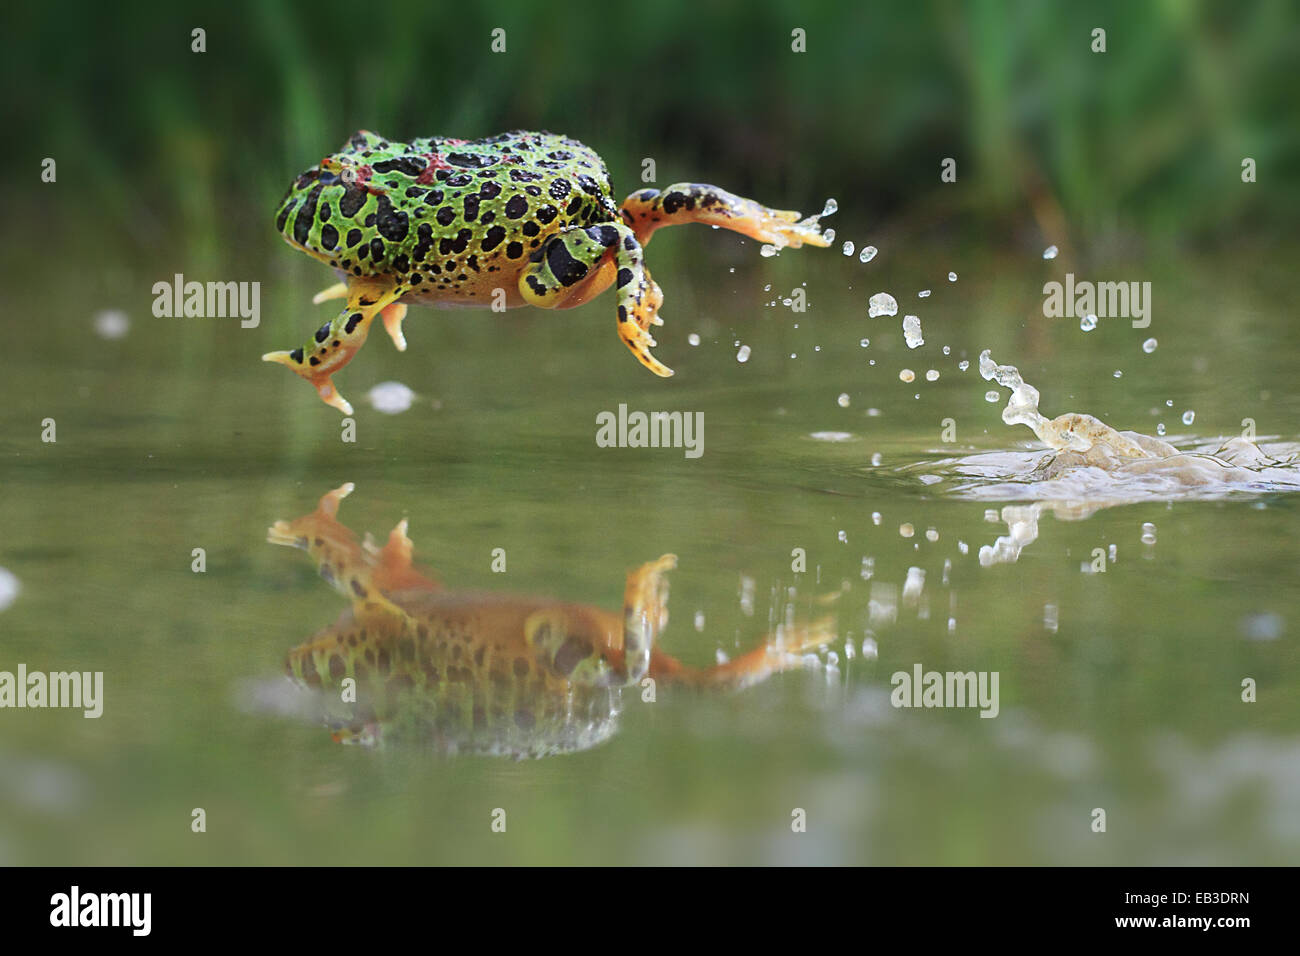 Indonesia, Riau Islands, Frog jumping in water Stock Photo